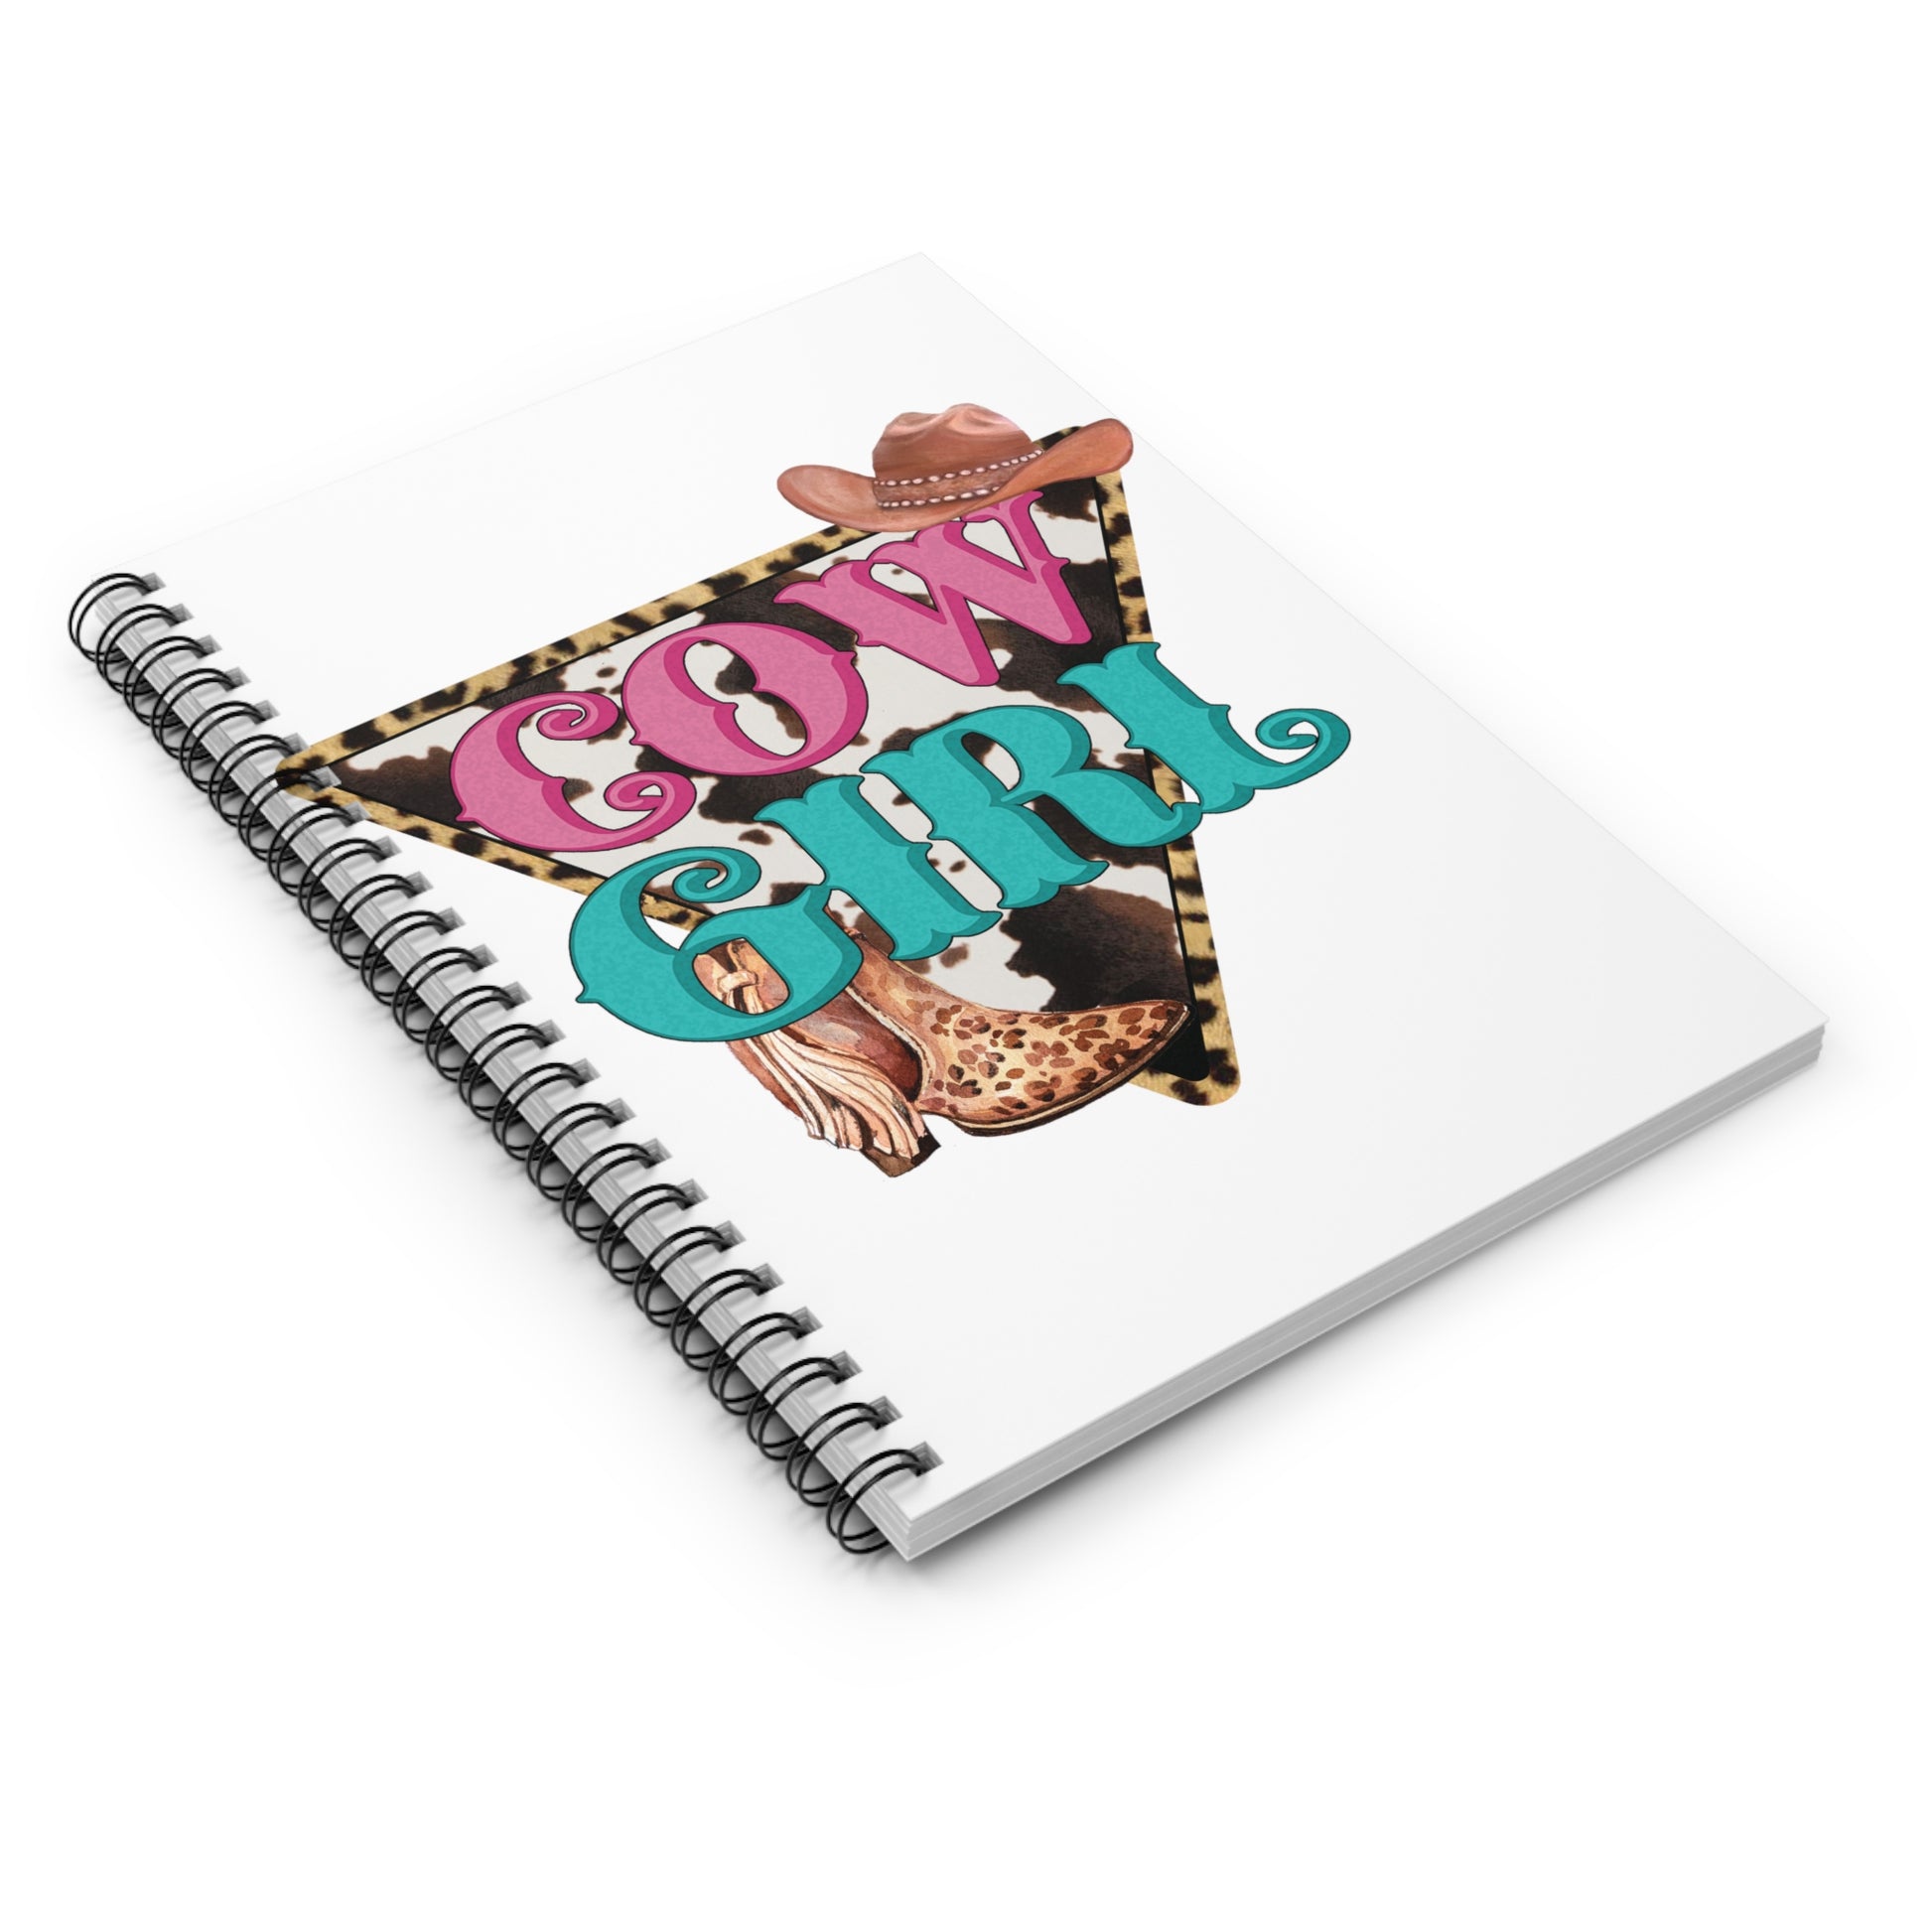 Cowgirl: Spiral Notebook - Log Books - Journals - Diaries - and More Custom Printed by TheGlassyLass